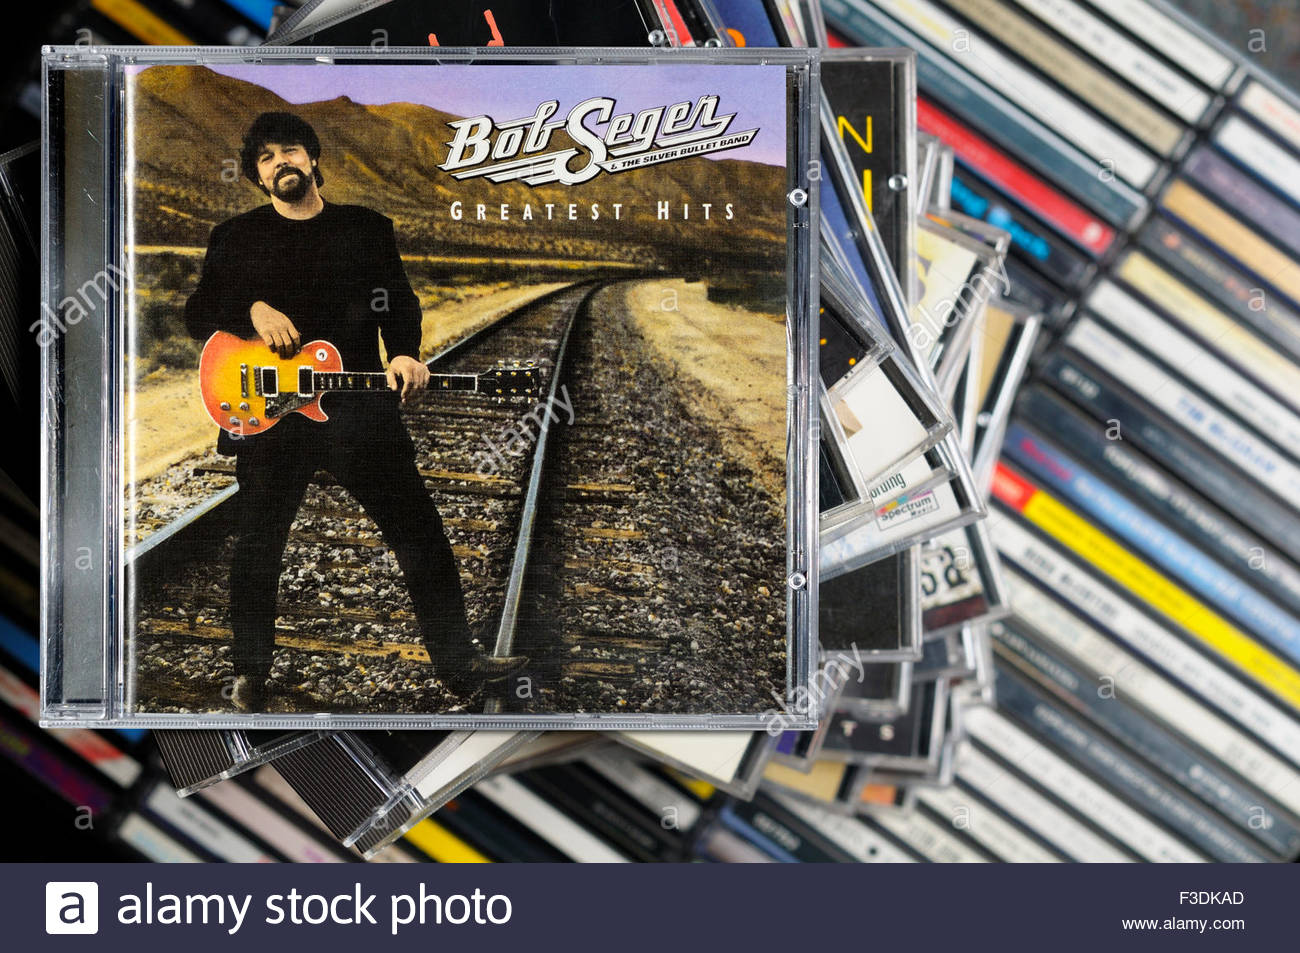 Bob Seger High Resolution Stock Photography And Images Alamy